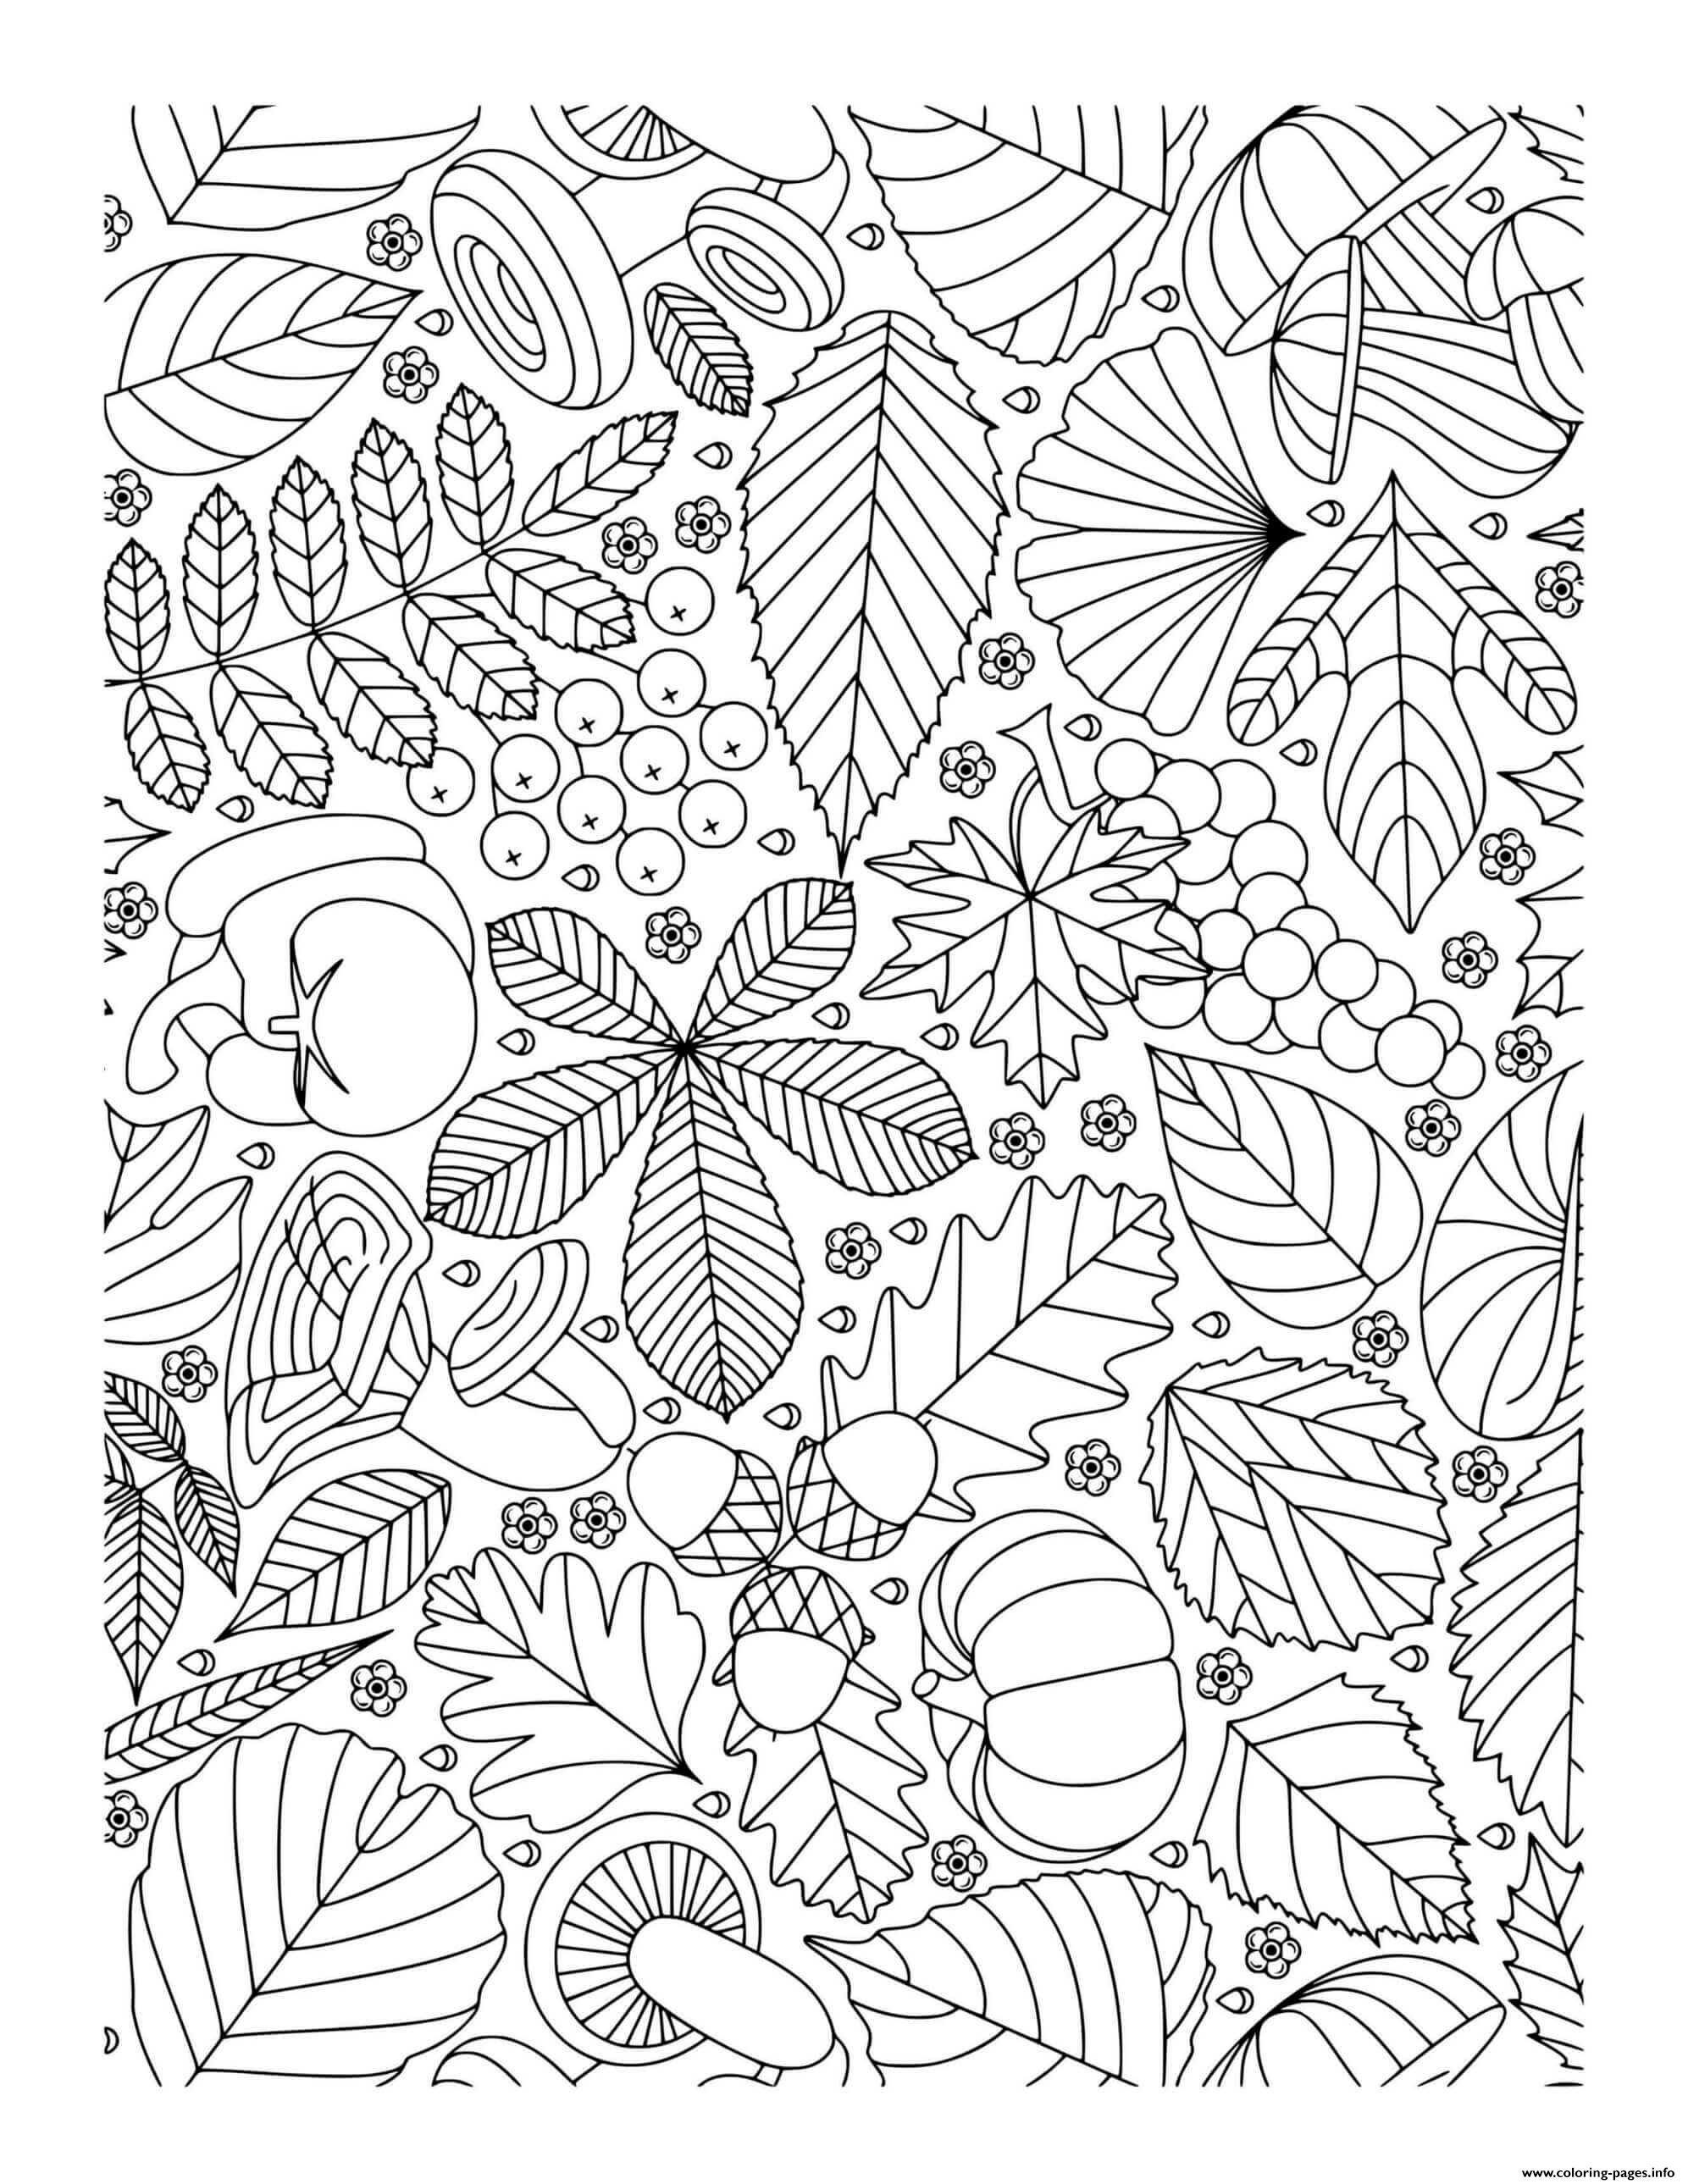 fall-autumn-doodle-for-adults-leaves-mushrooms-grapes-pumpkin-coloring